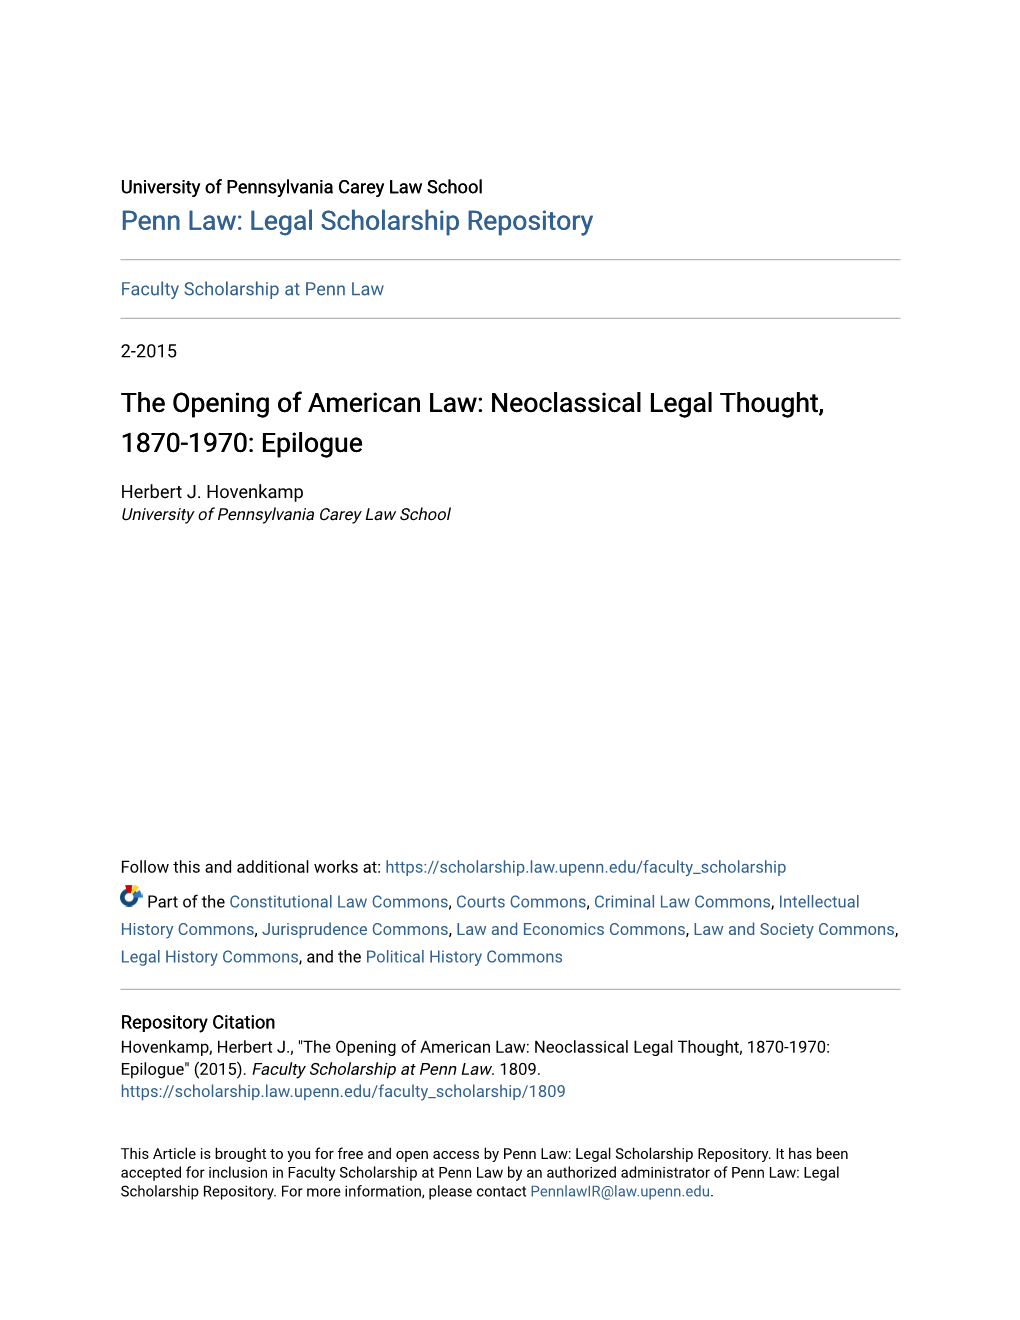 The Opening of American Law: Neoclassical Legal Thought, 1870-1970: Epilogue